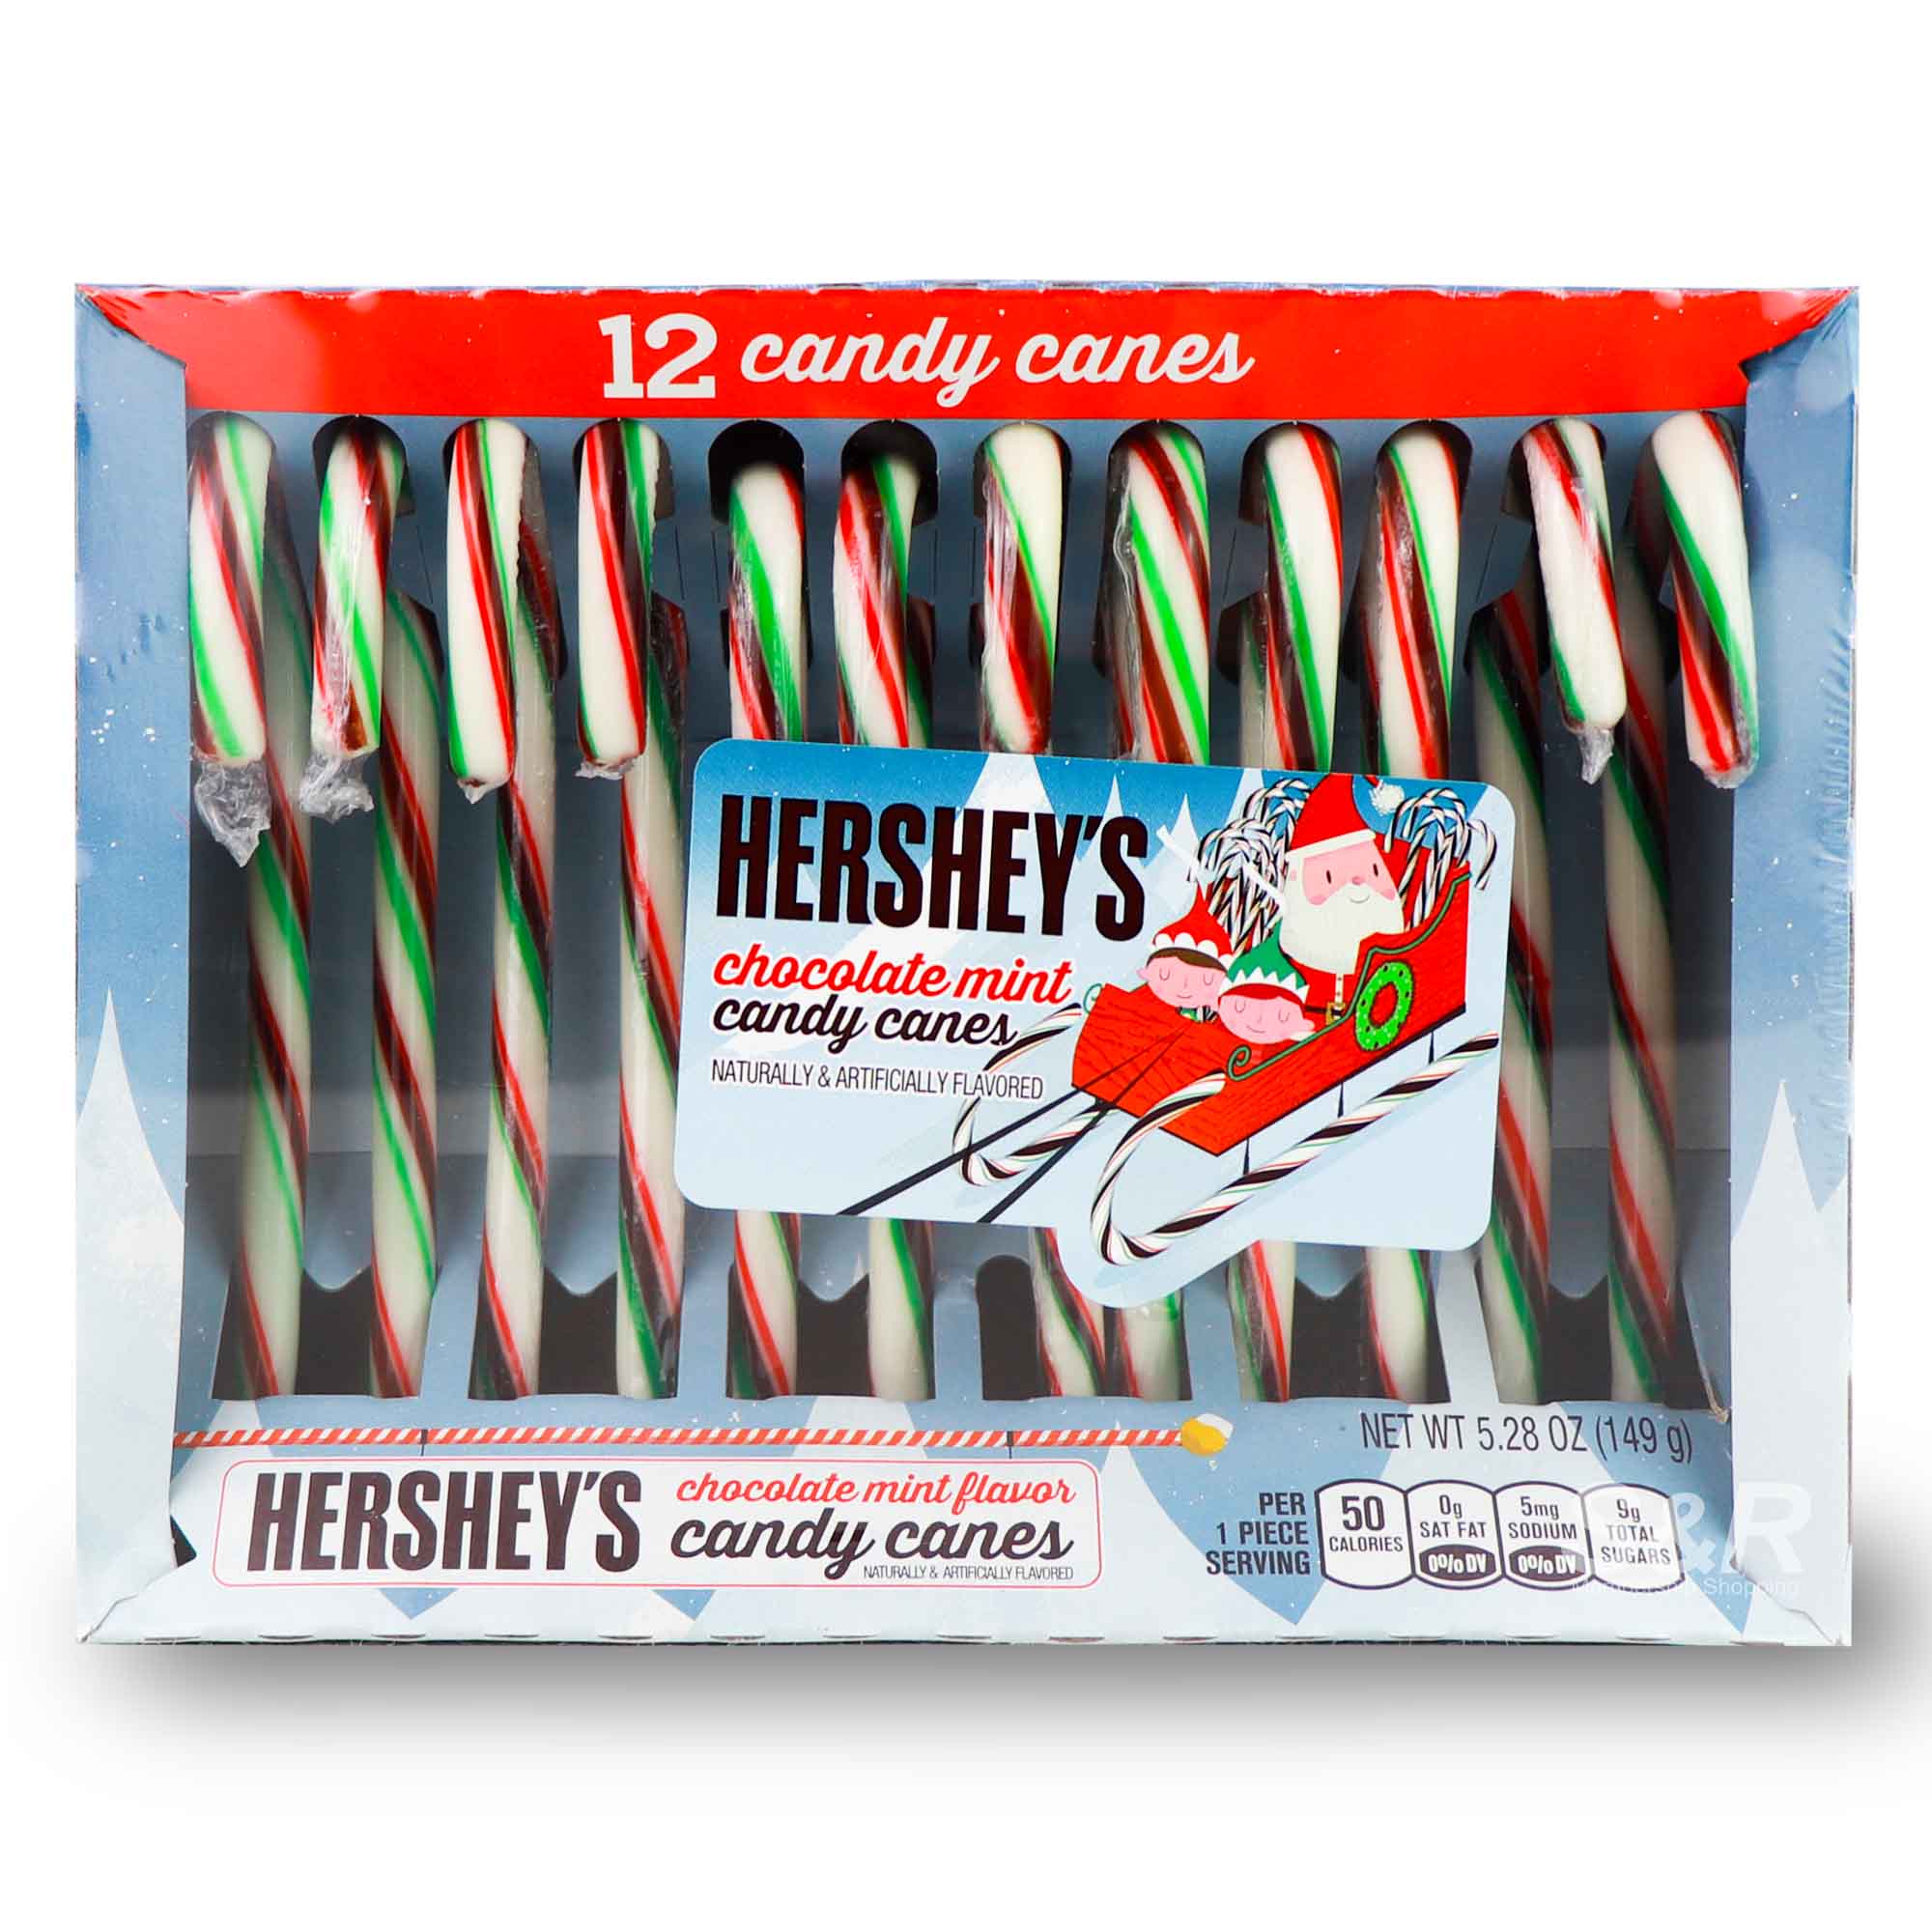 Hershey's Chocolate Mint Candy Canes (12g x 12pcs)